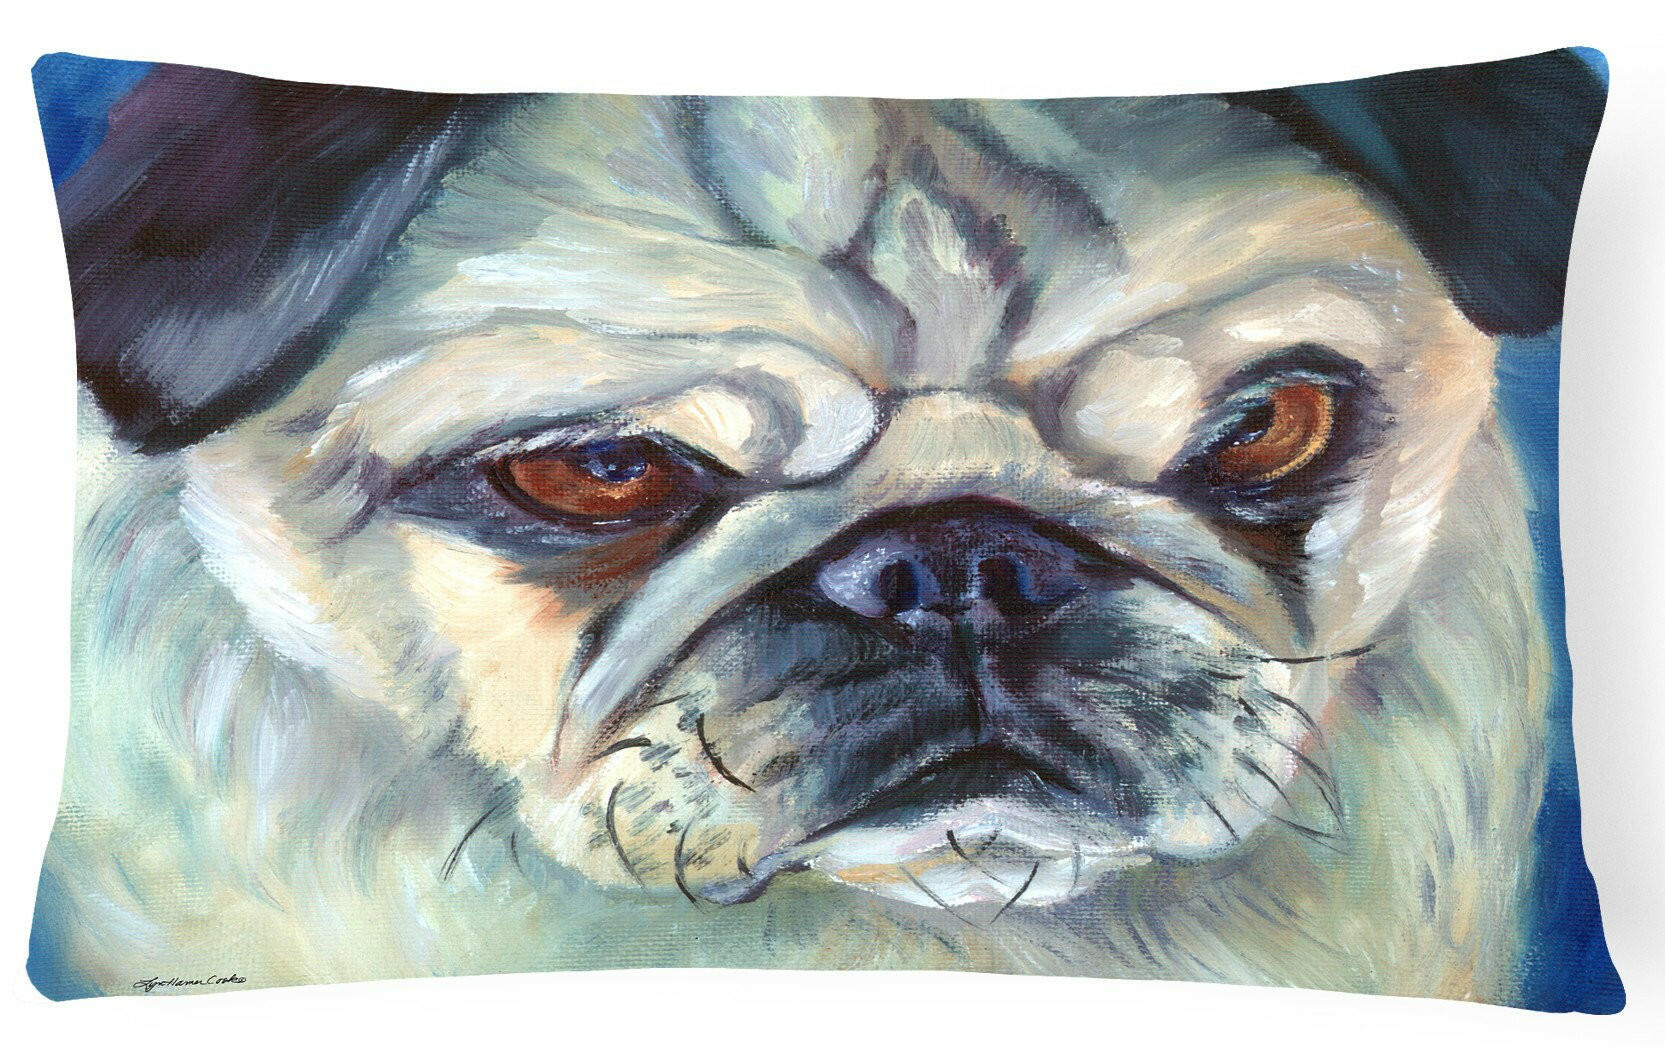 Pug in Thought Fabric Decorative Pillow 7422PW1216 by Caroline's Treasures